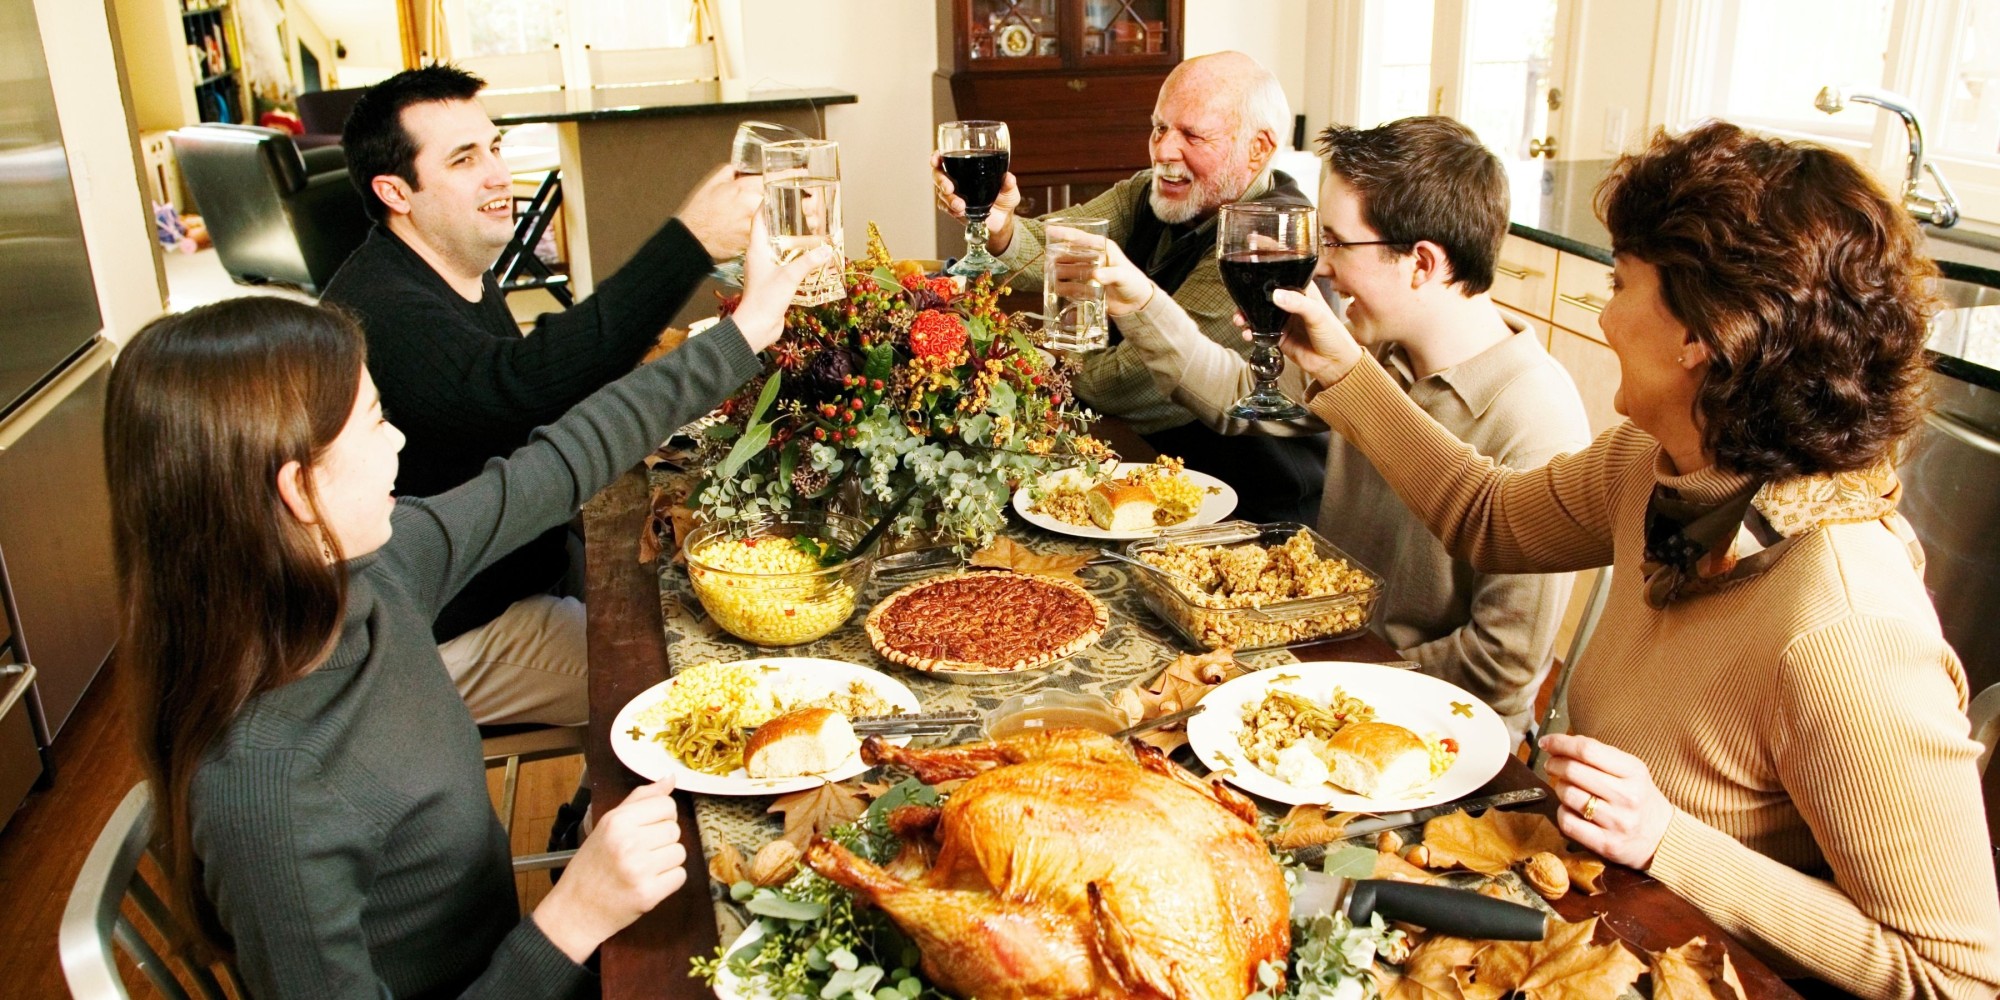 How to Have a Happy Thanksgiving With Your Special Needs Family